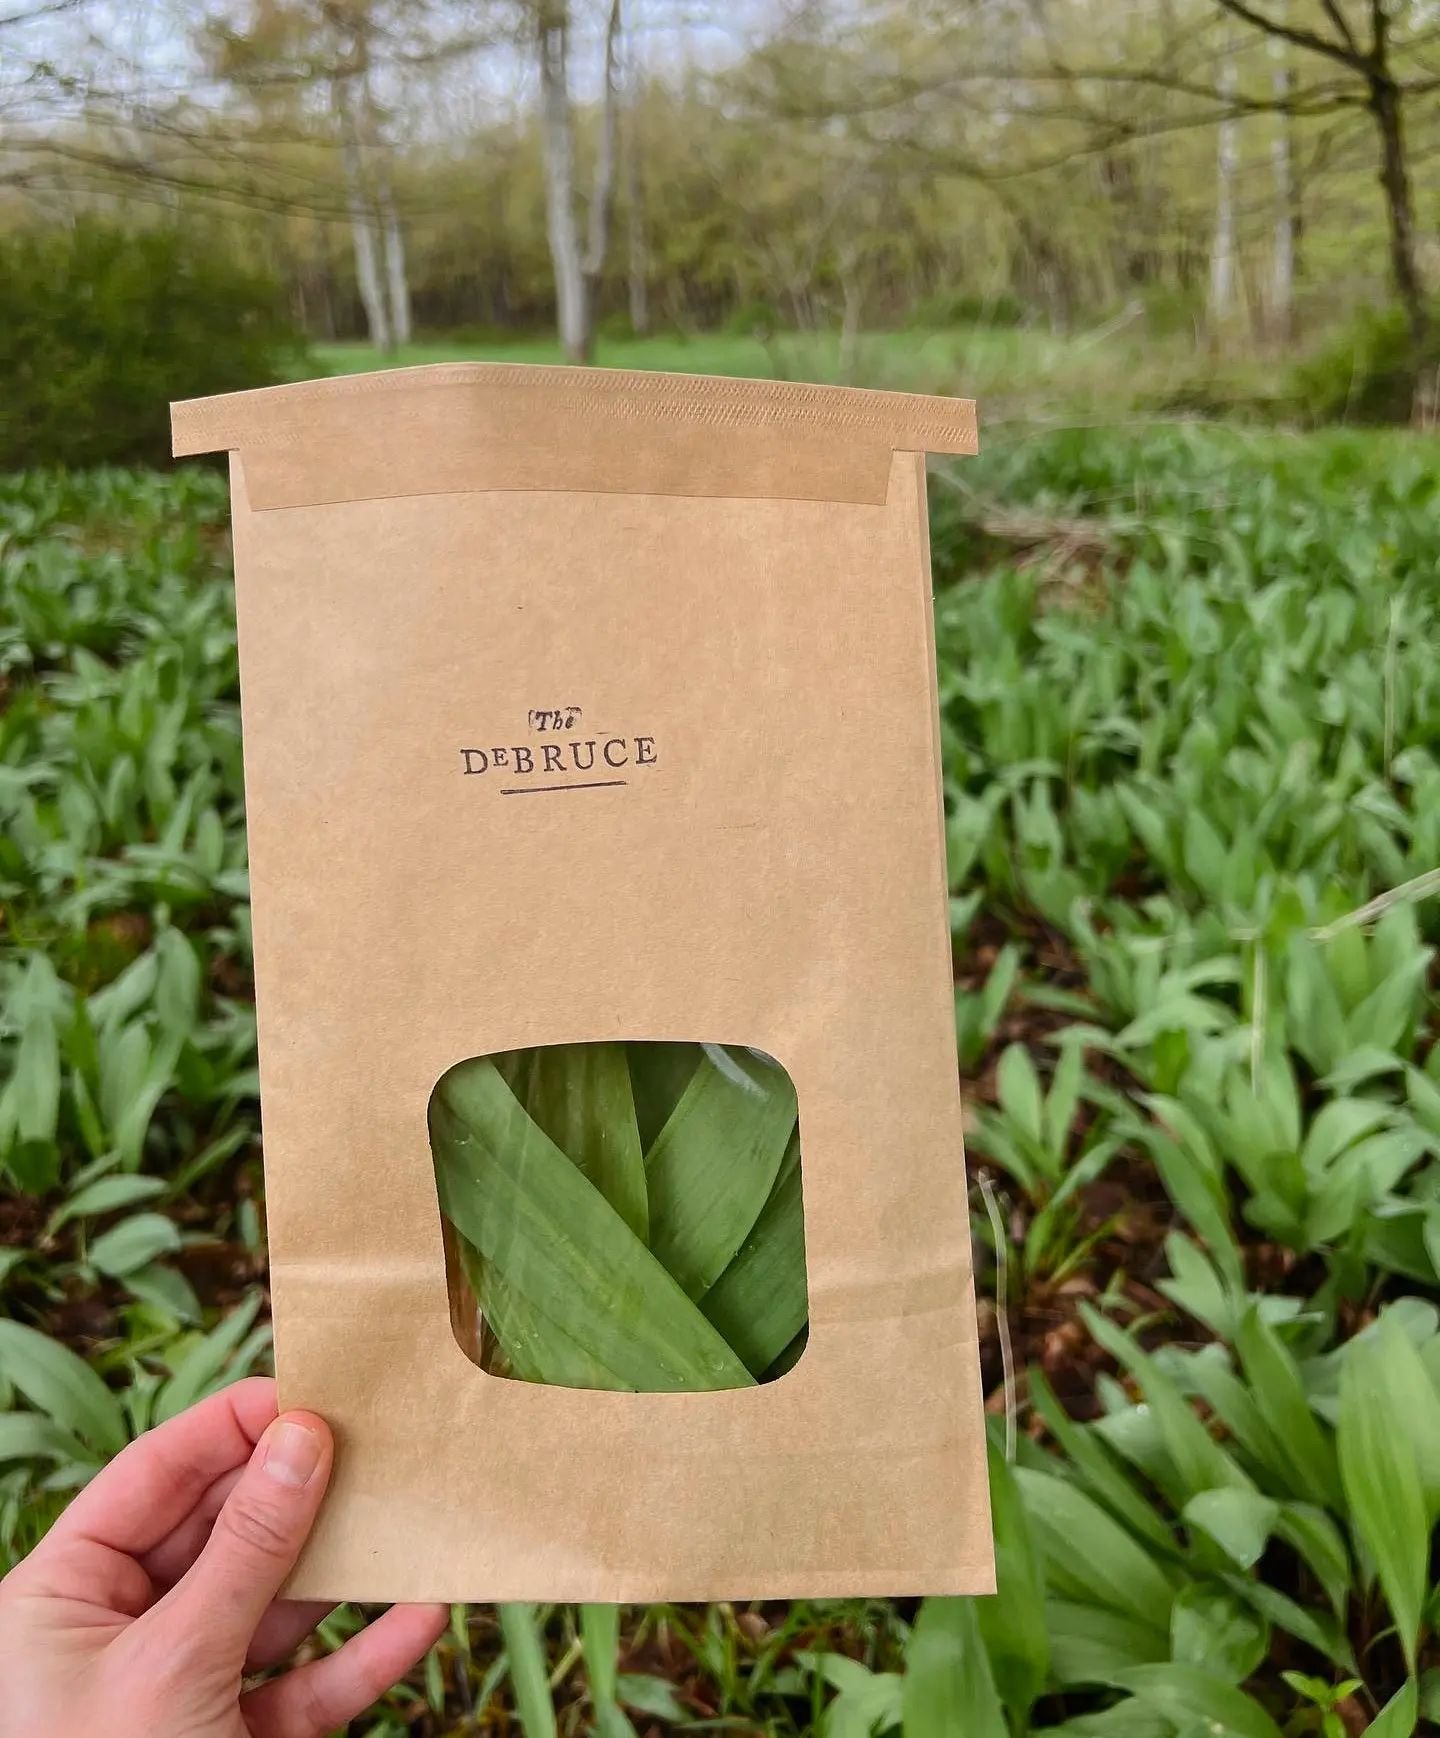 It's almost that time. Ramp season is coming soon. 🌱 #thedebruce 

Photo by: @saracurnow 

#upstate #newyork #rampseason #catskills #hotel #culinaryhotel #ny #restaurant